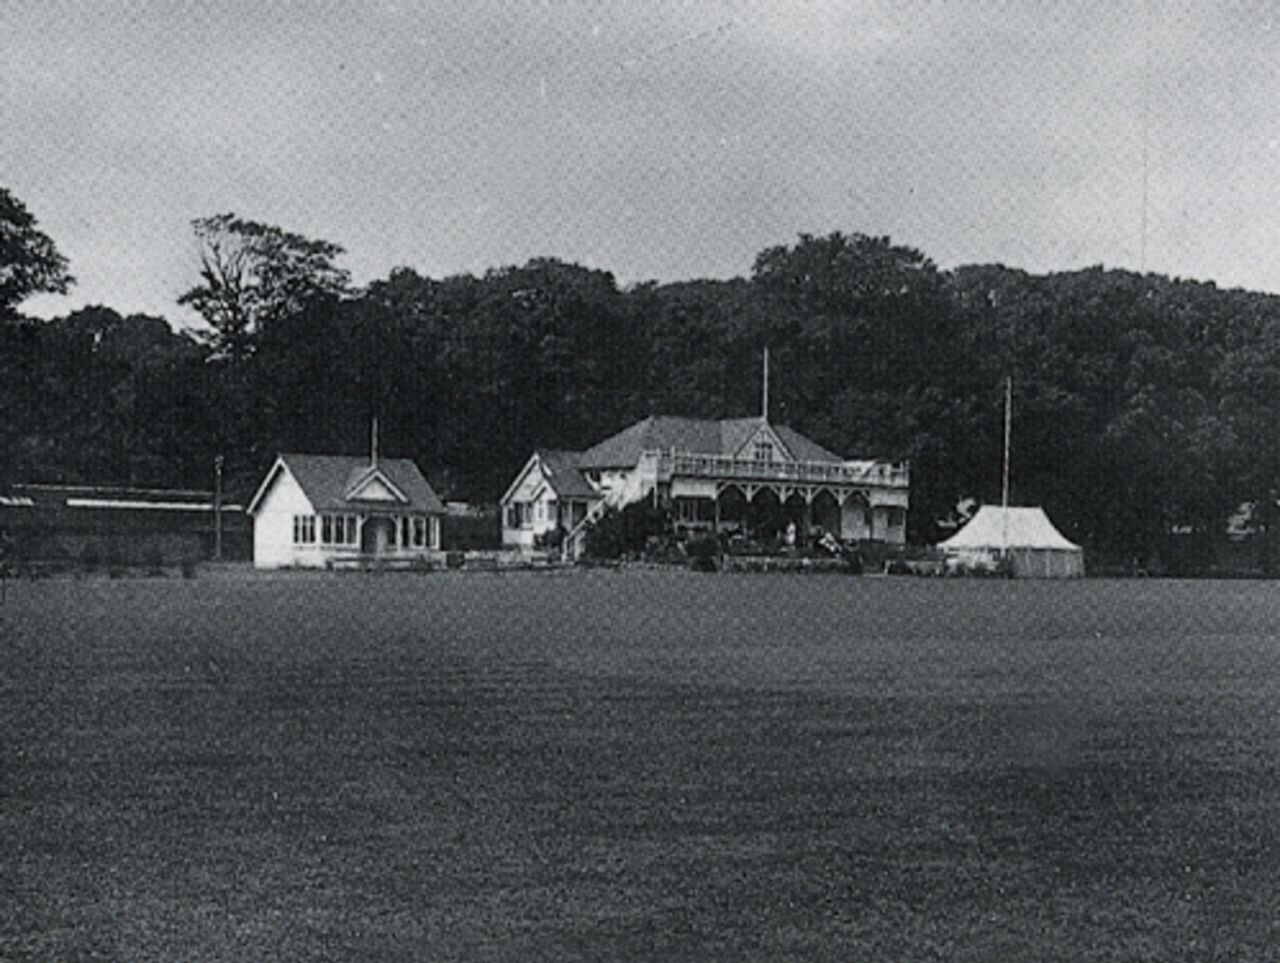 The pavilion at The Saffrons, Eastbourne in about 1910 (postcard)